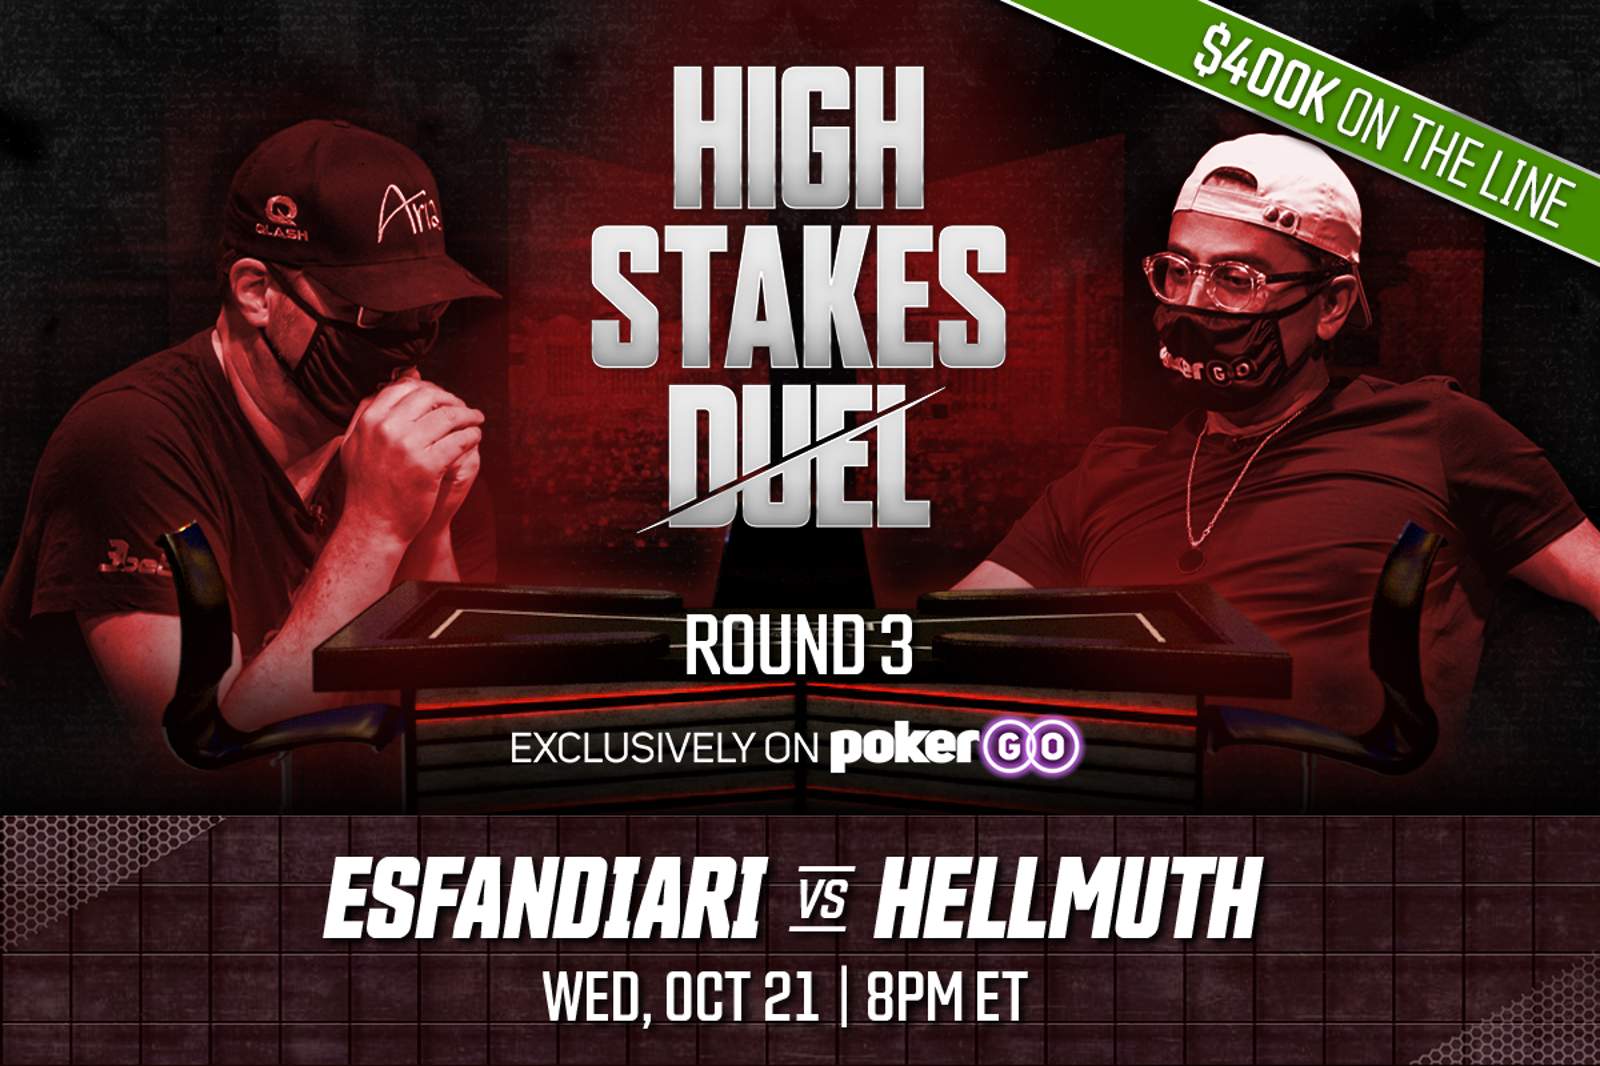 Round 3 of High Stakes Duel Announced for Wednesday, October 21